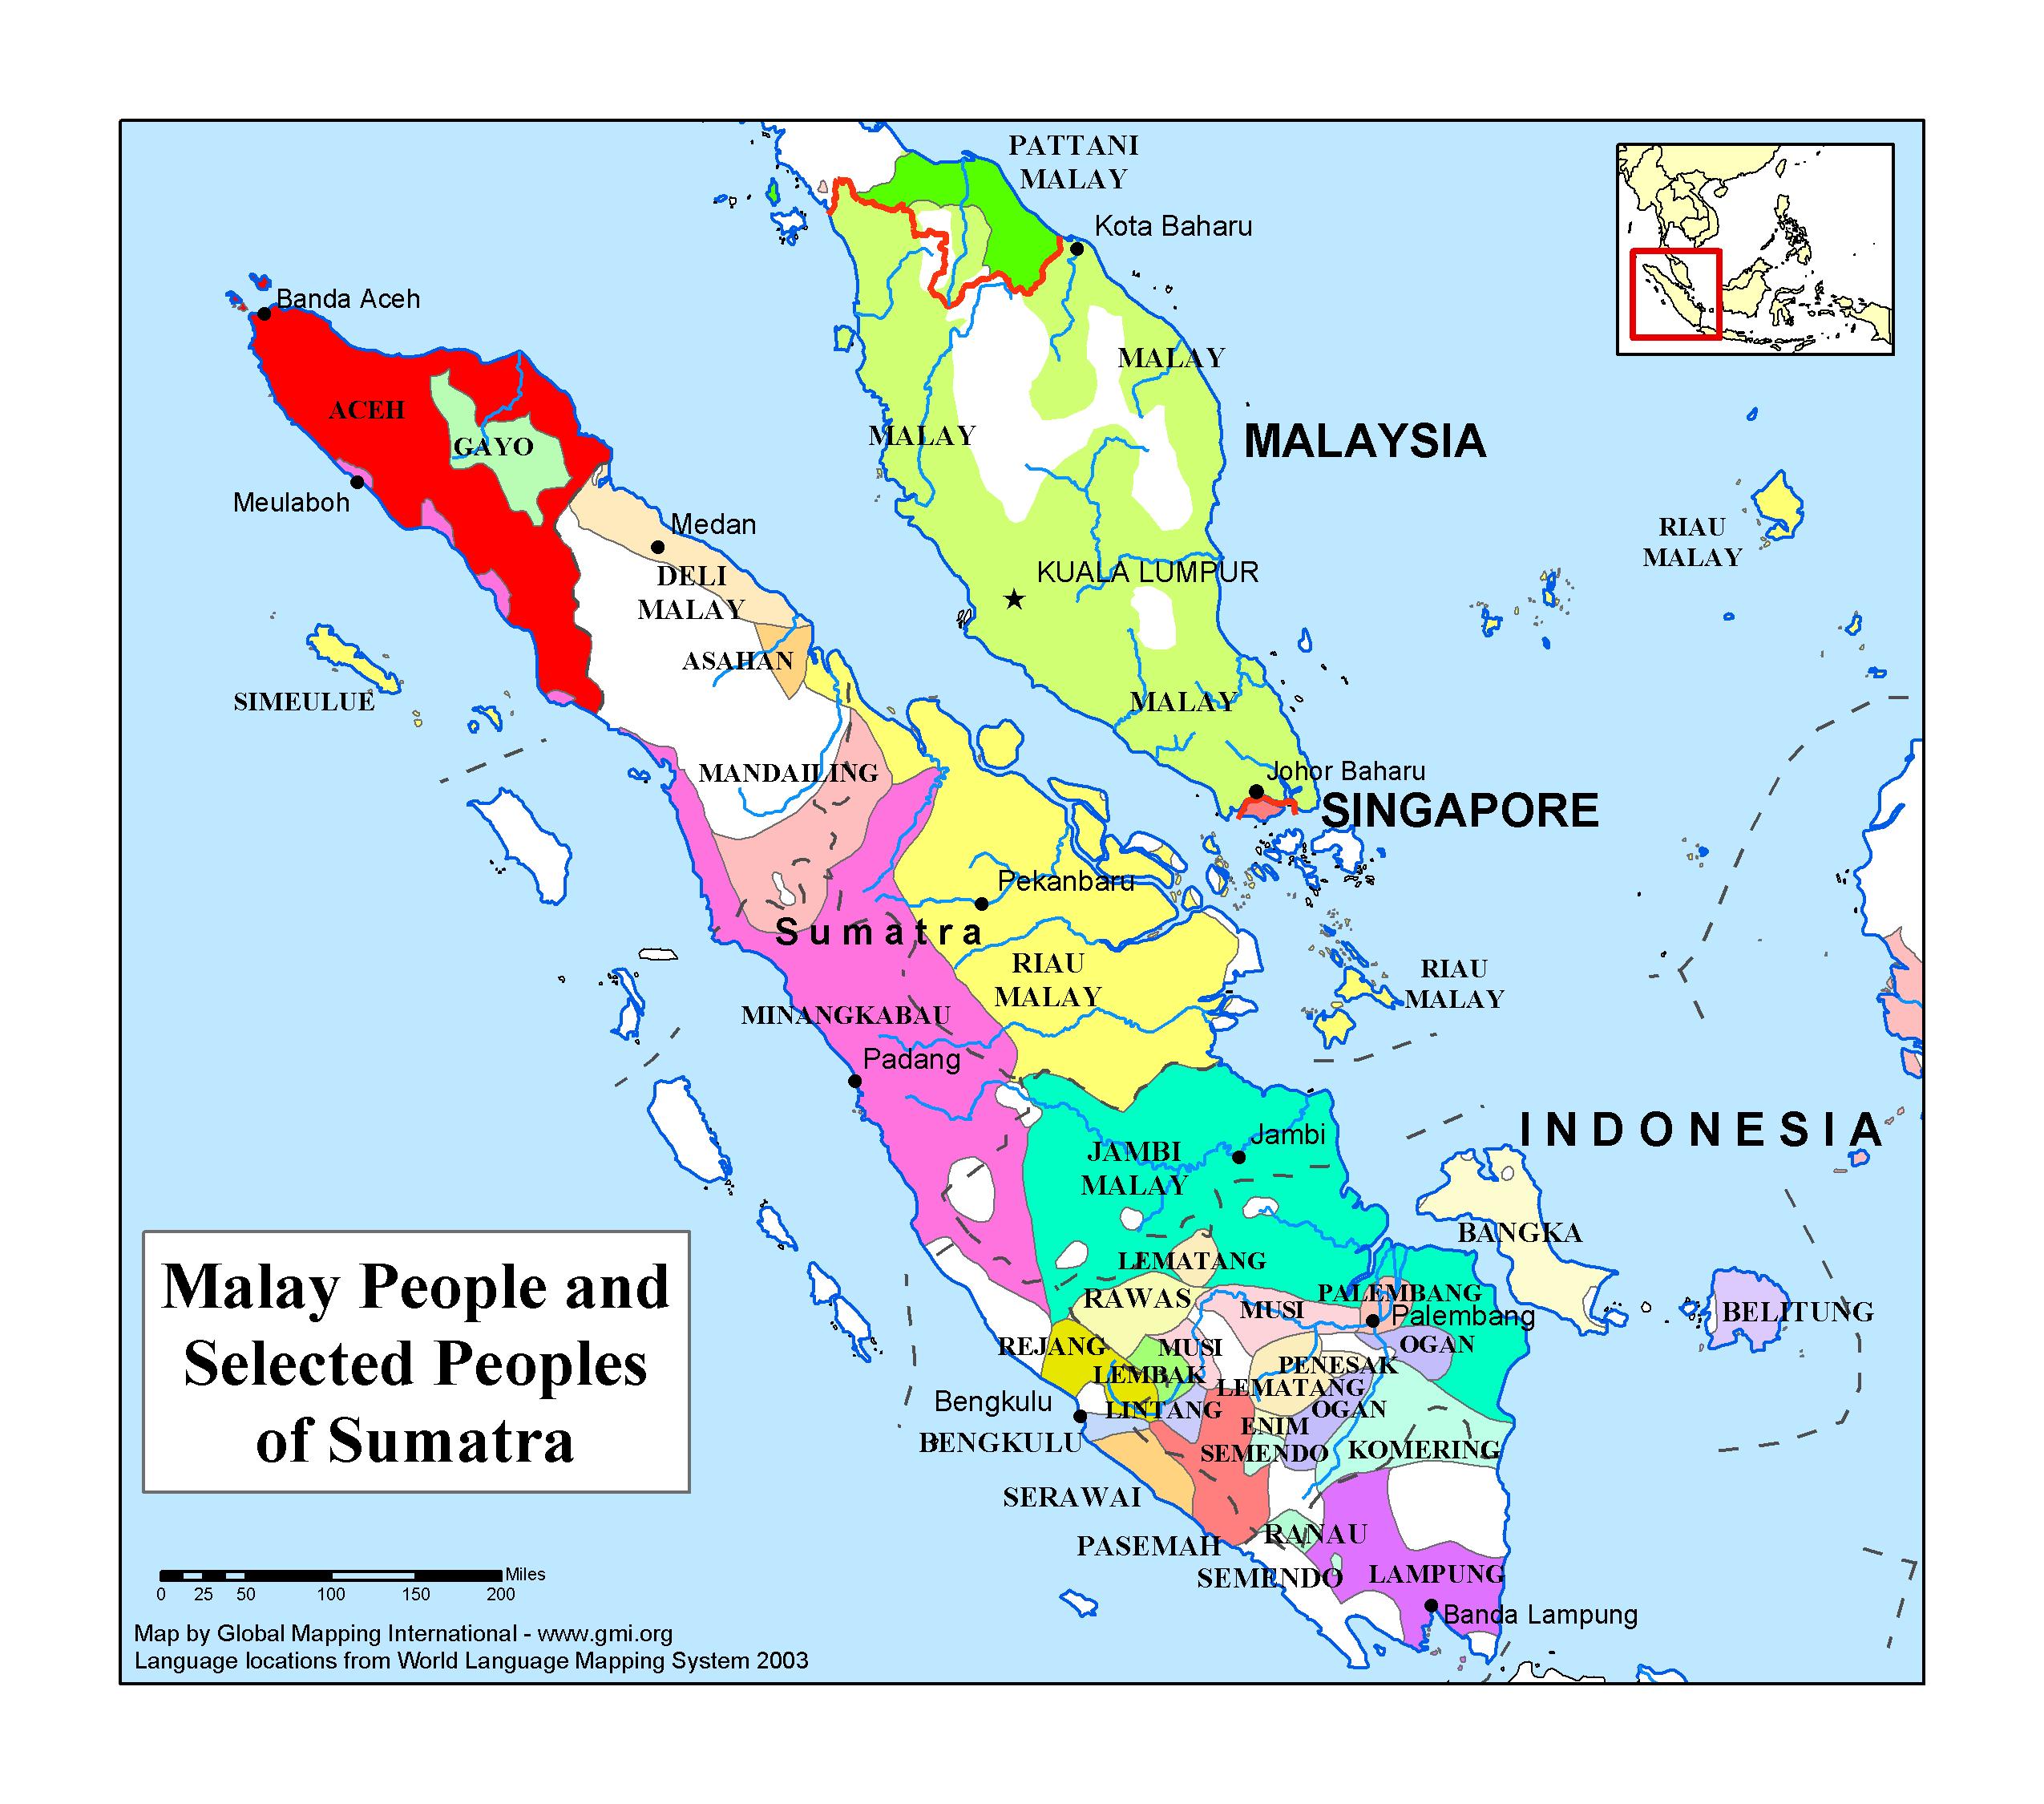 Malay People and Selected People of Sumatra